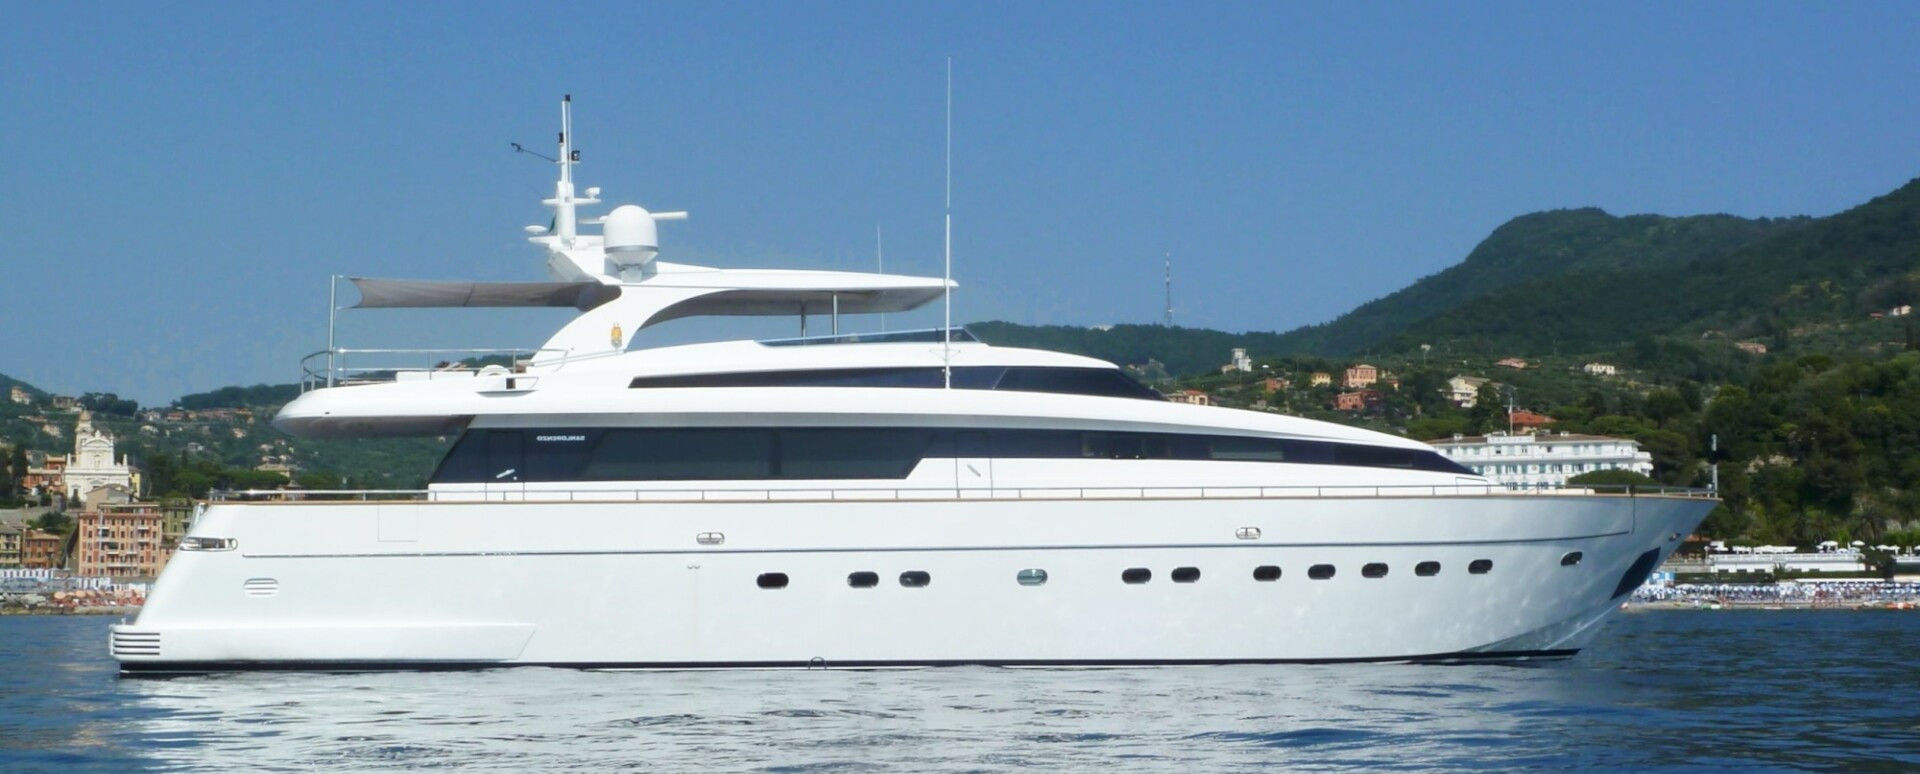                                                                                                     M/Y SUD  a further € 100,000 price drop, now asking € 2,650,000 ex VAT
                                                                                            